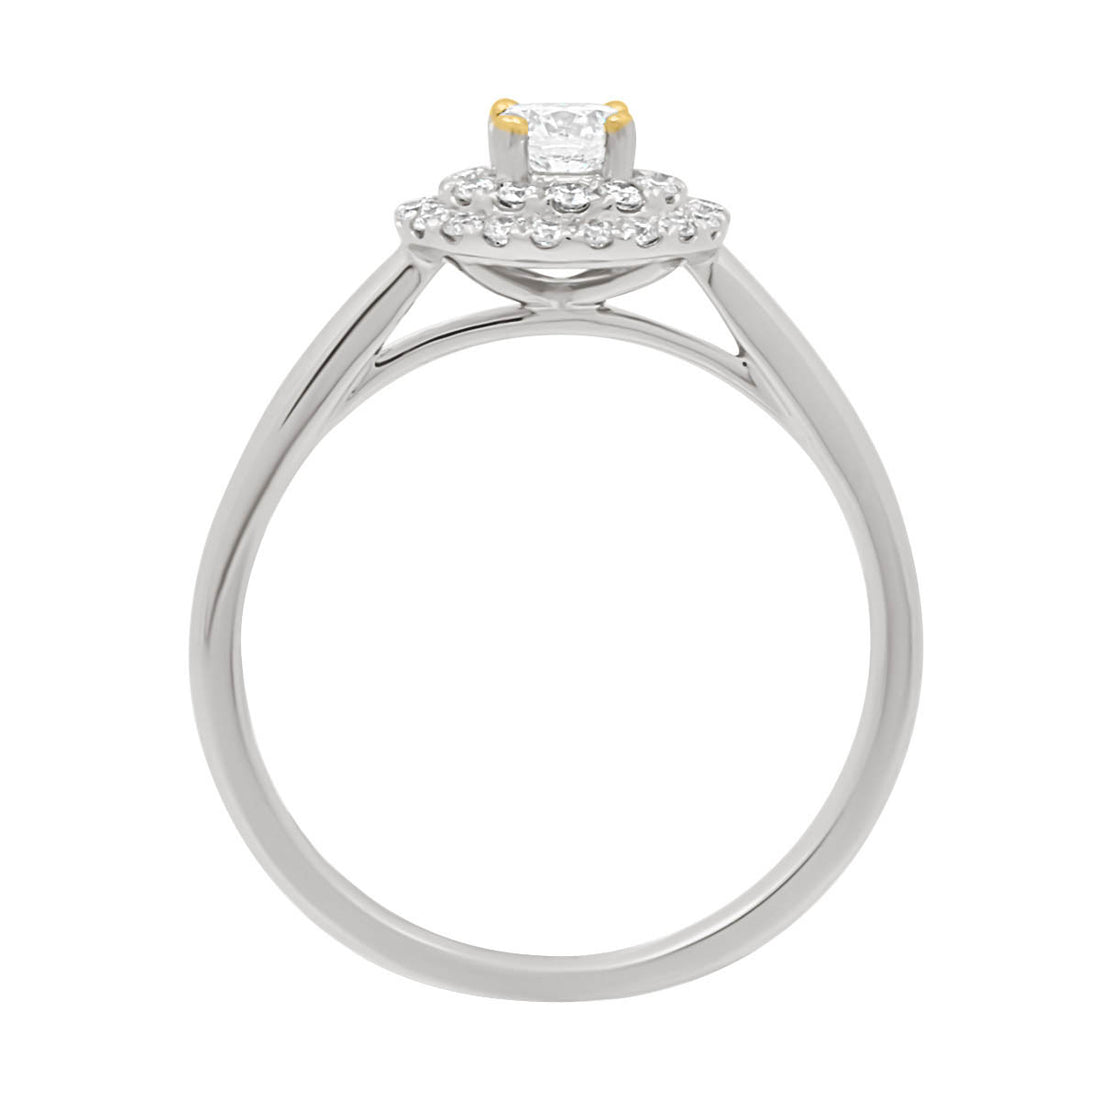 Ornate Diamond Ring WITH DOUBLE HALO SET IN WHITE GOLD STANDING UPRIGHT